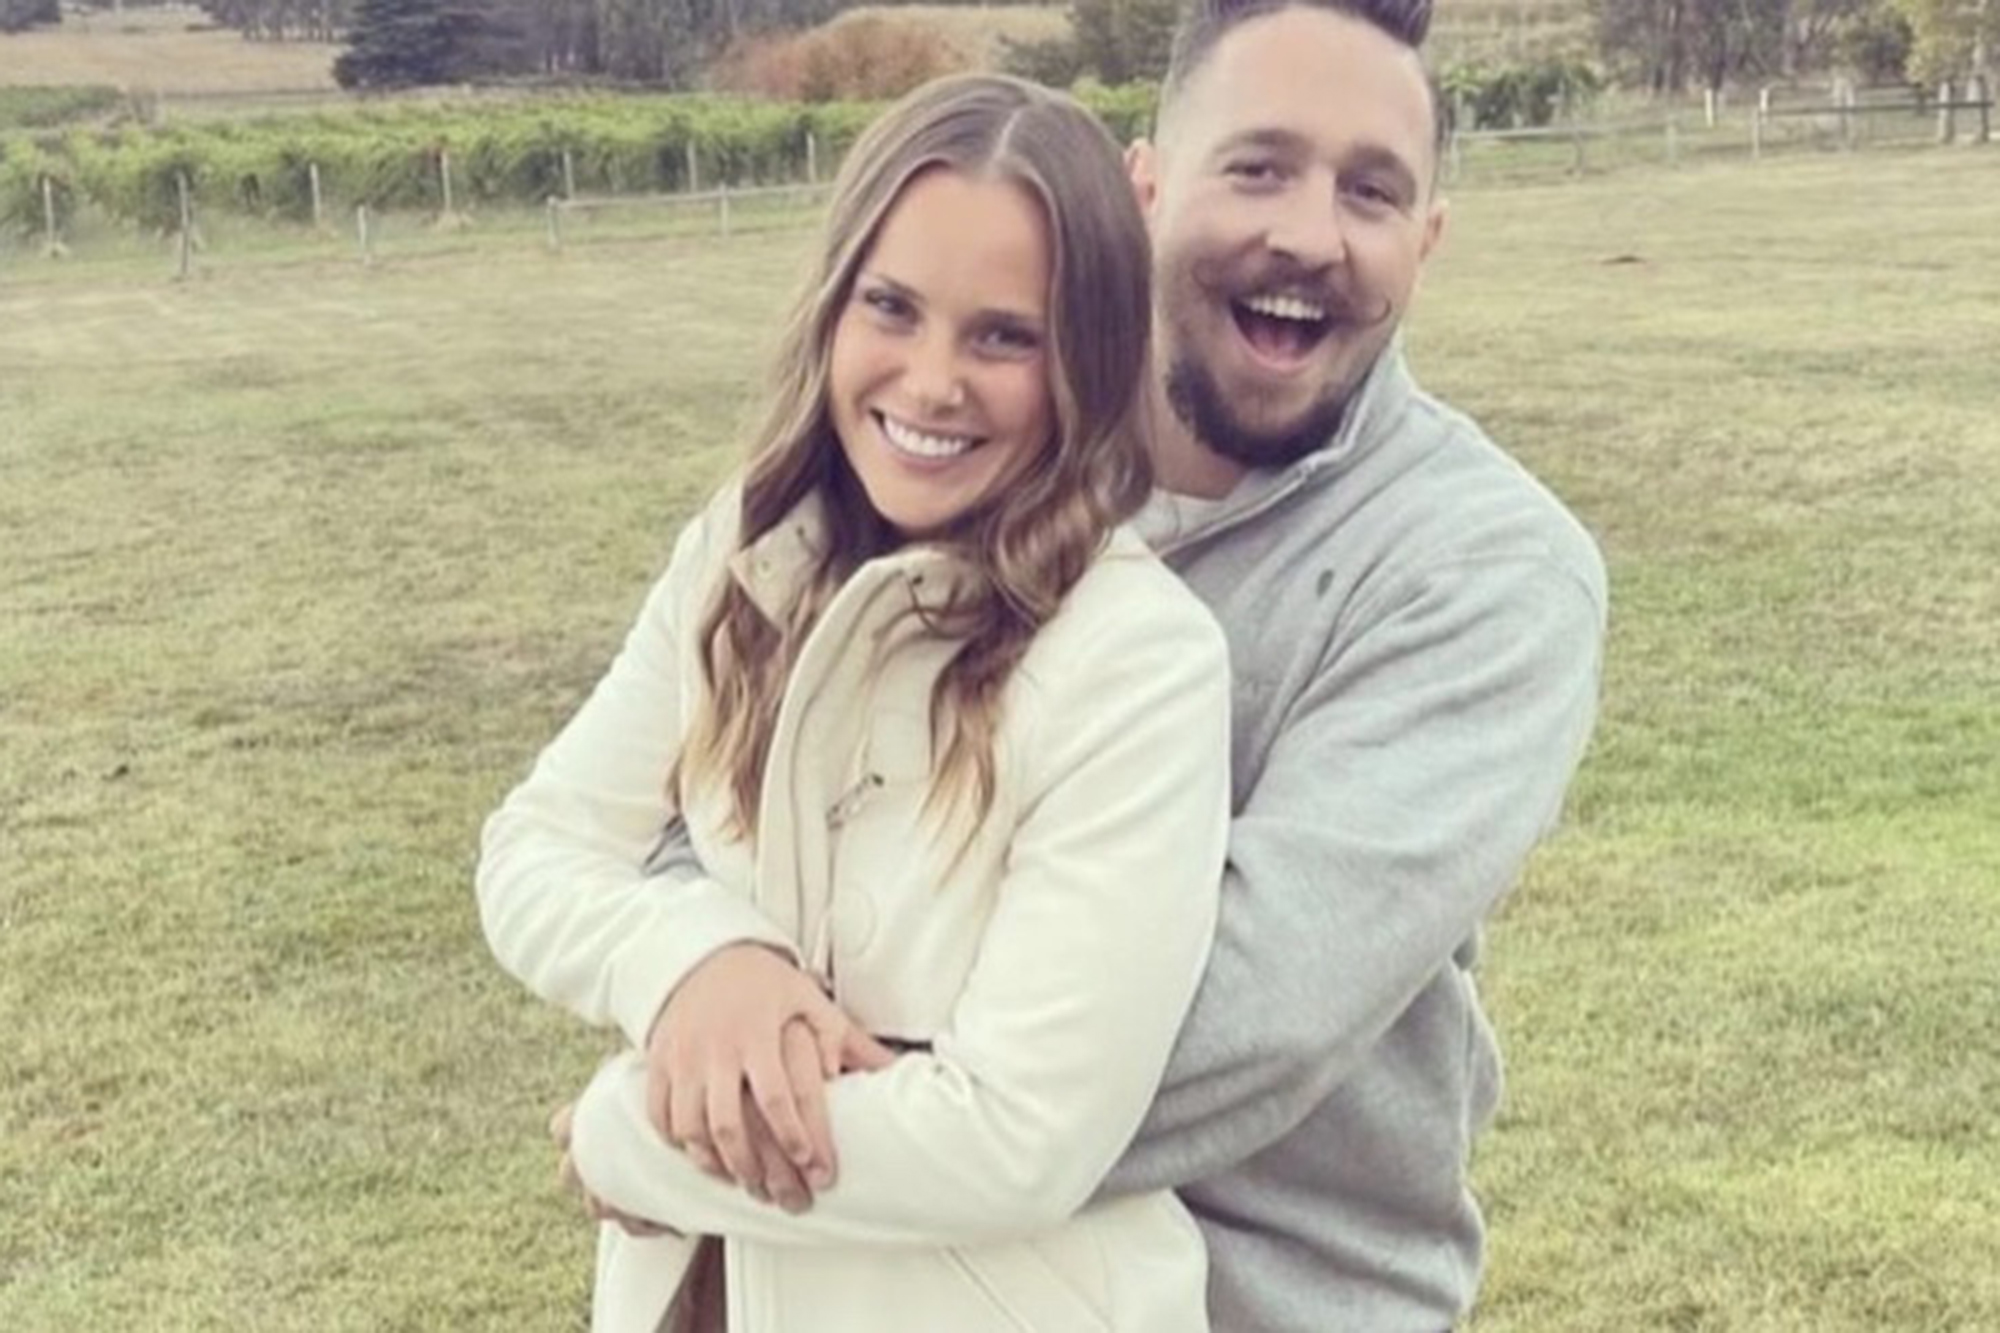 Georgia McDonald and Tom Van Staveren were due to fly out from Melbourne to Bali on Sunday to celebrate her 30th birthday.